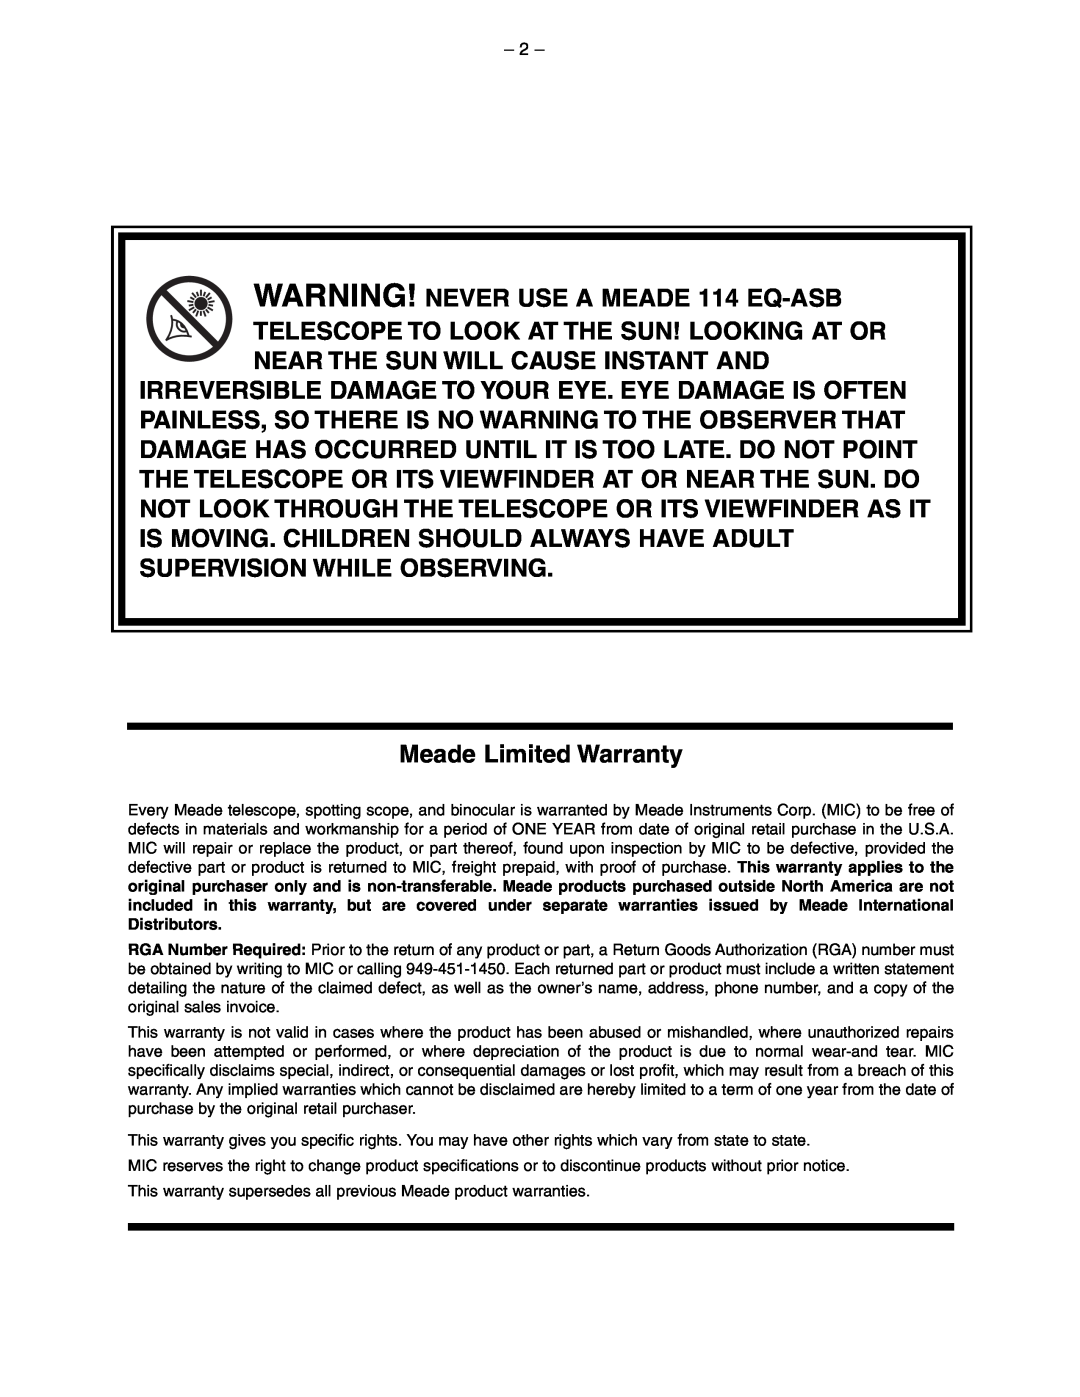 Meade instruction manual WARNING! NEVER USE A MEADE 114 EQ-ASB, Meade Limited Warranty 